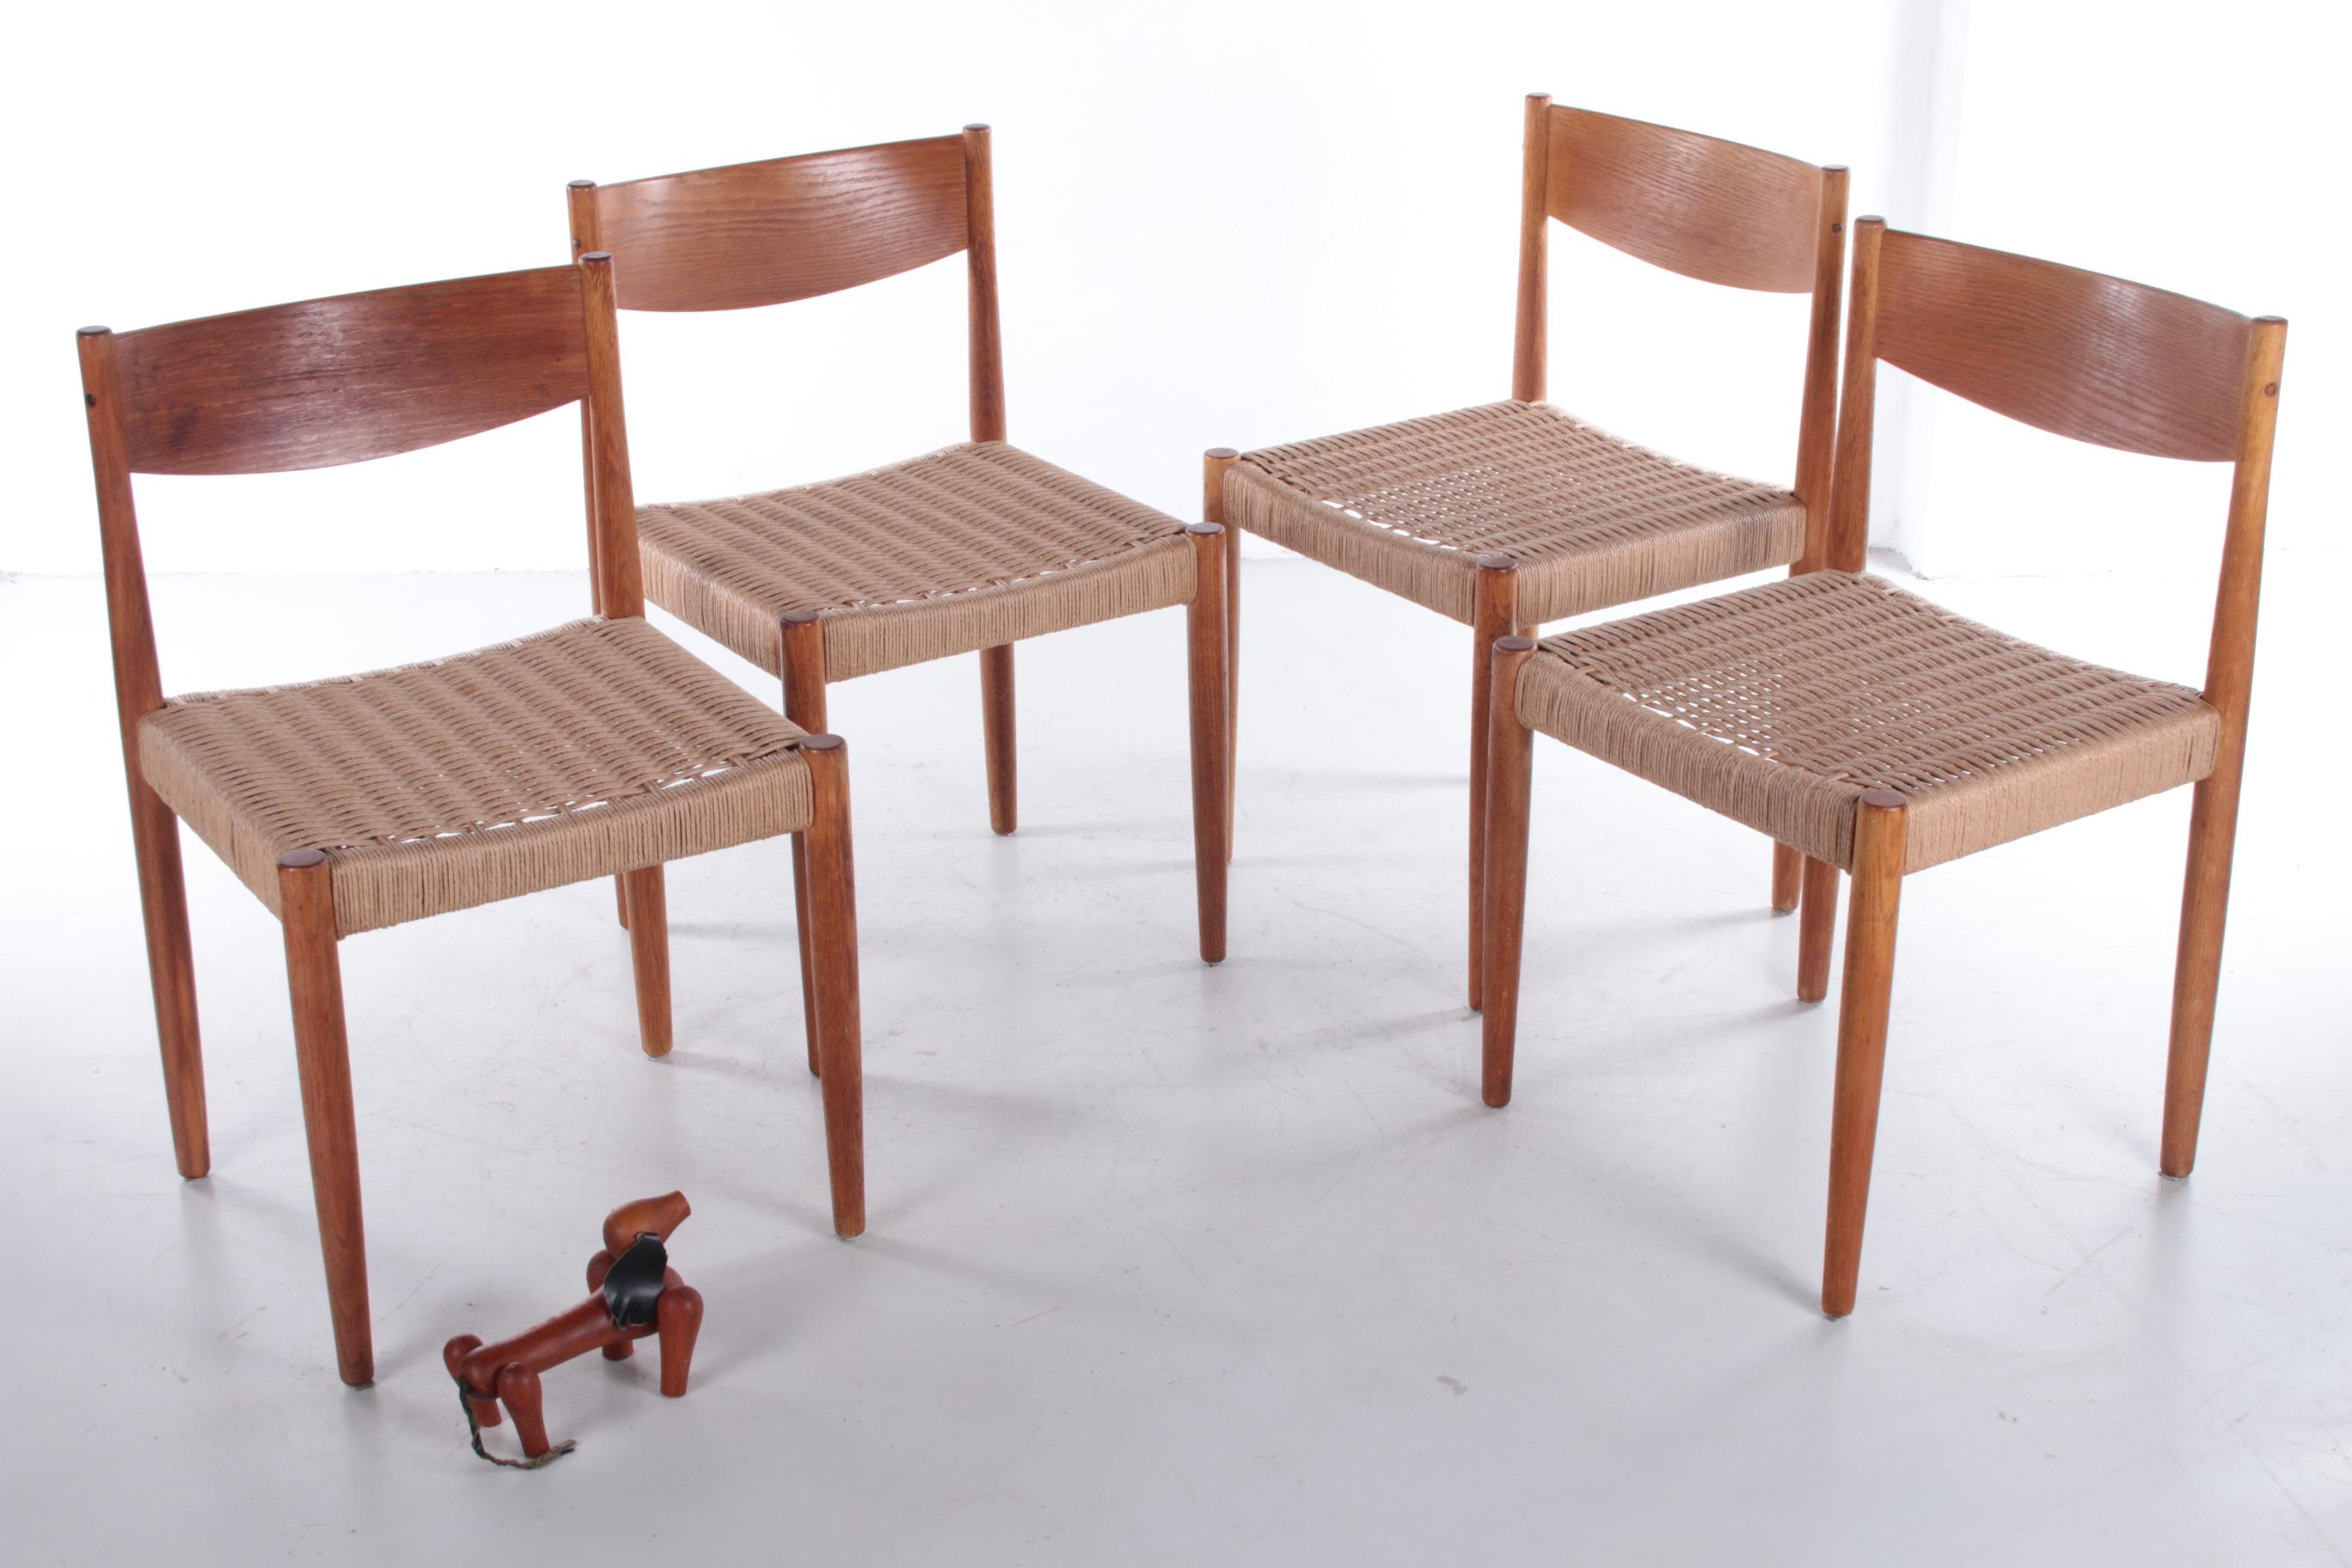 Set of 4 dining room chairs by Poul Volther for Frem Røjle, 1960s

A beautiful set of four dining room chairs from the 1960s. The design comes from the famous Danish designer Poul Volther for the furniture brand Frem Røjle.

The chair consists